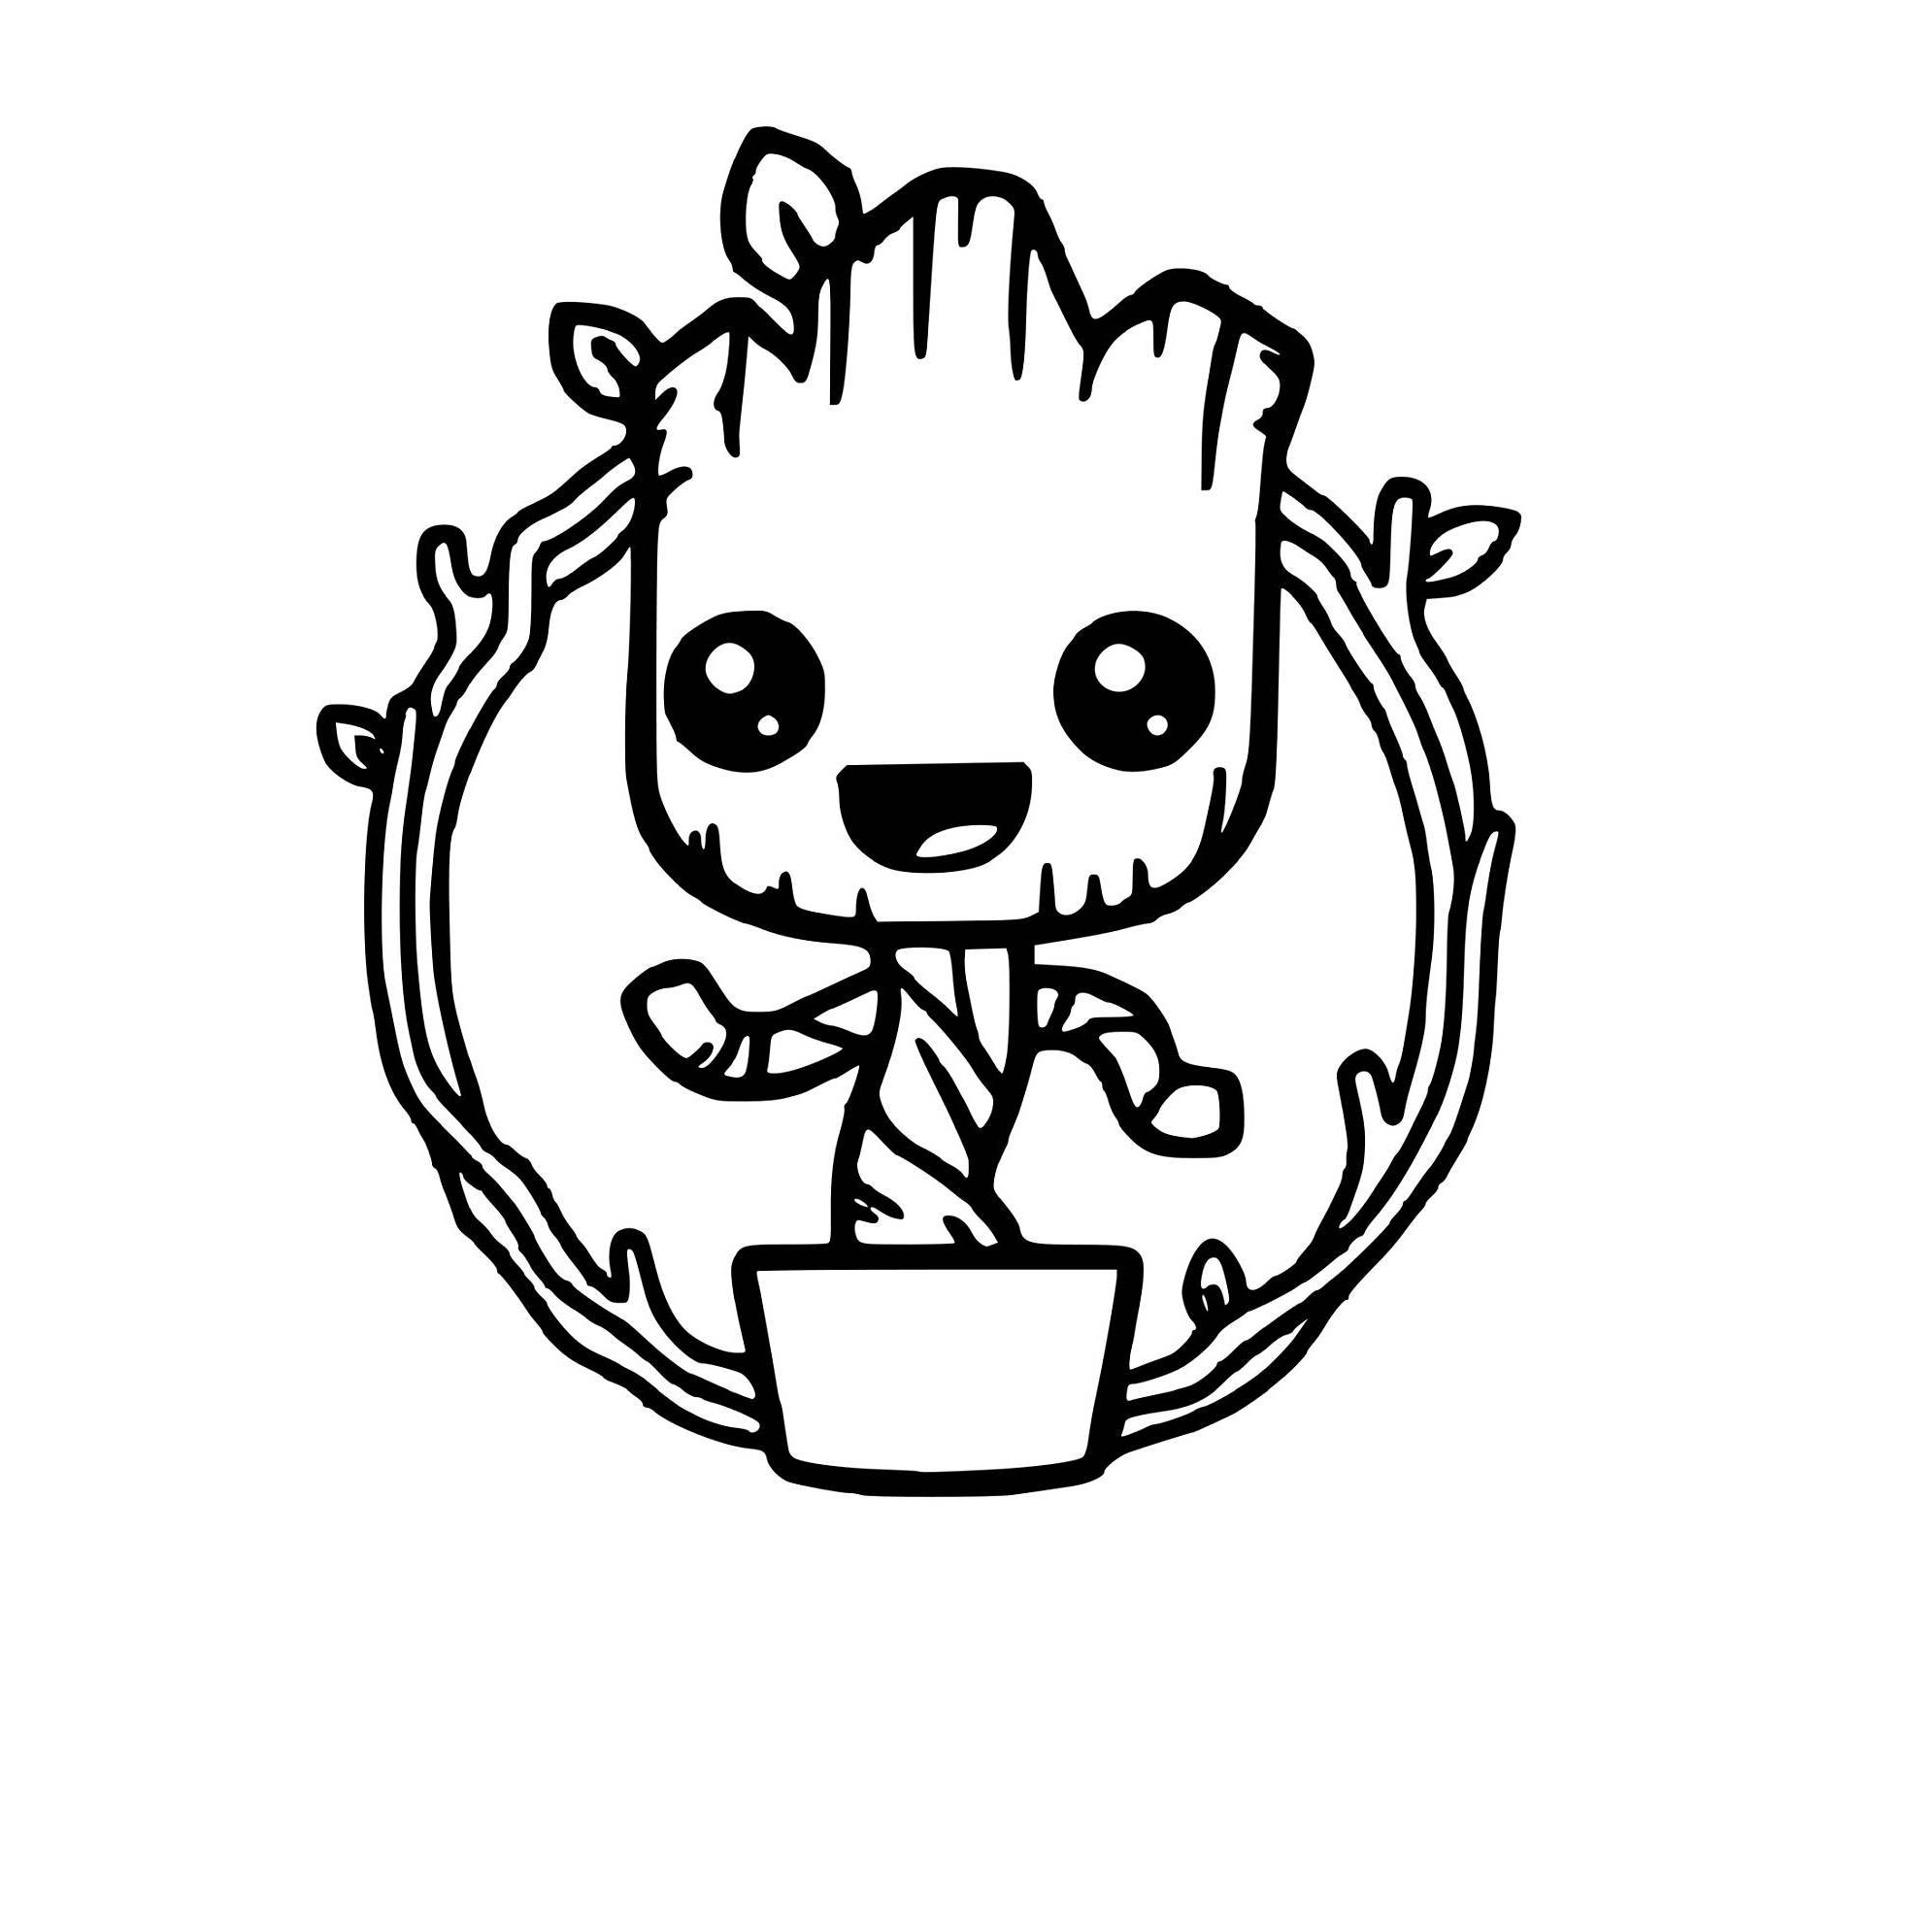 Download Baby Groot Decal Guardians of the Galaxy Decal Marvel